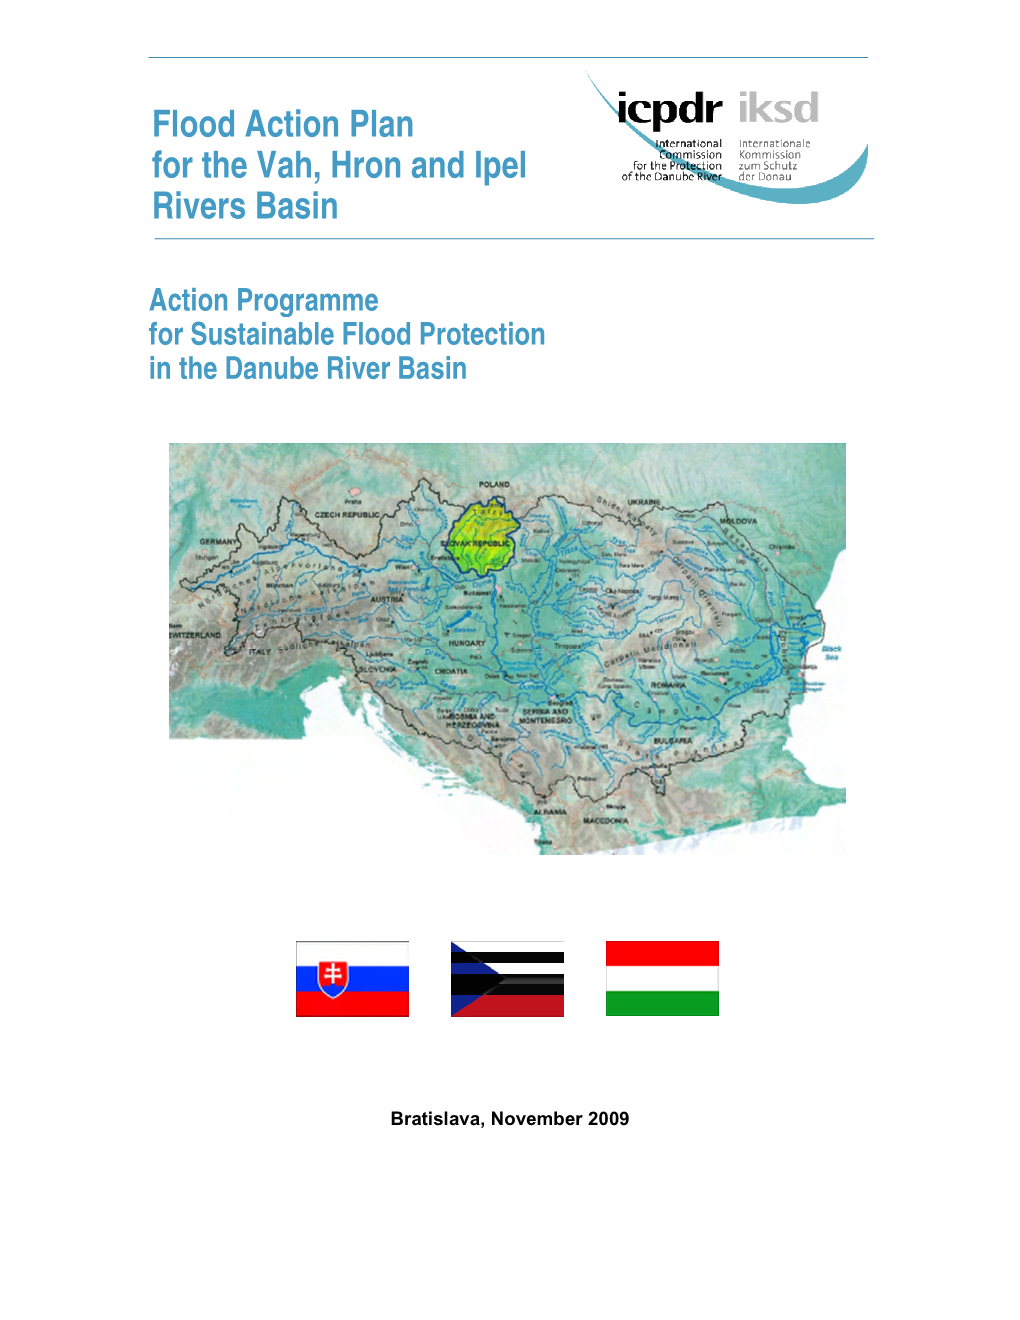 Flood Action Plan for the Vah, Hron and Ipel Rivers Basin